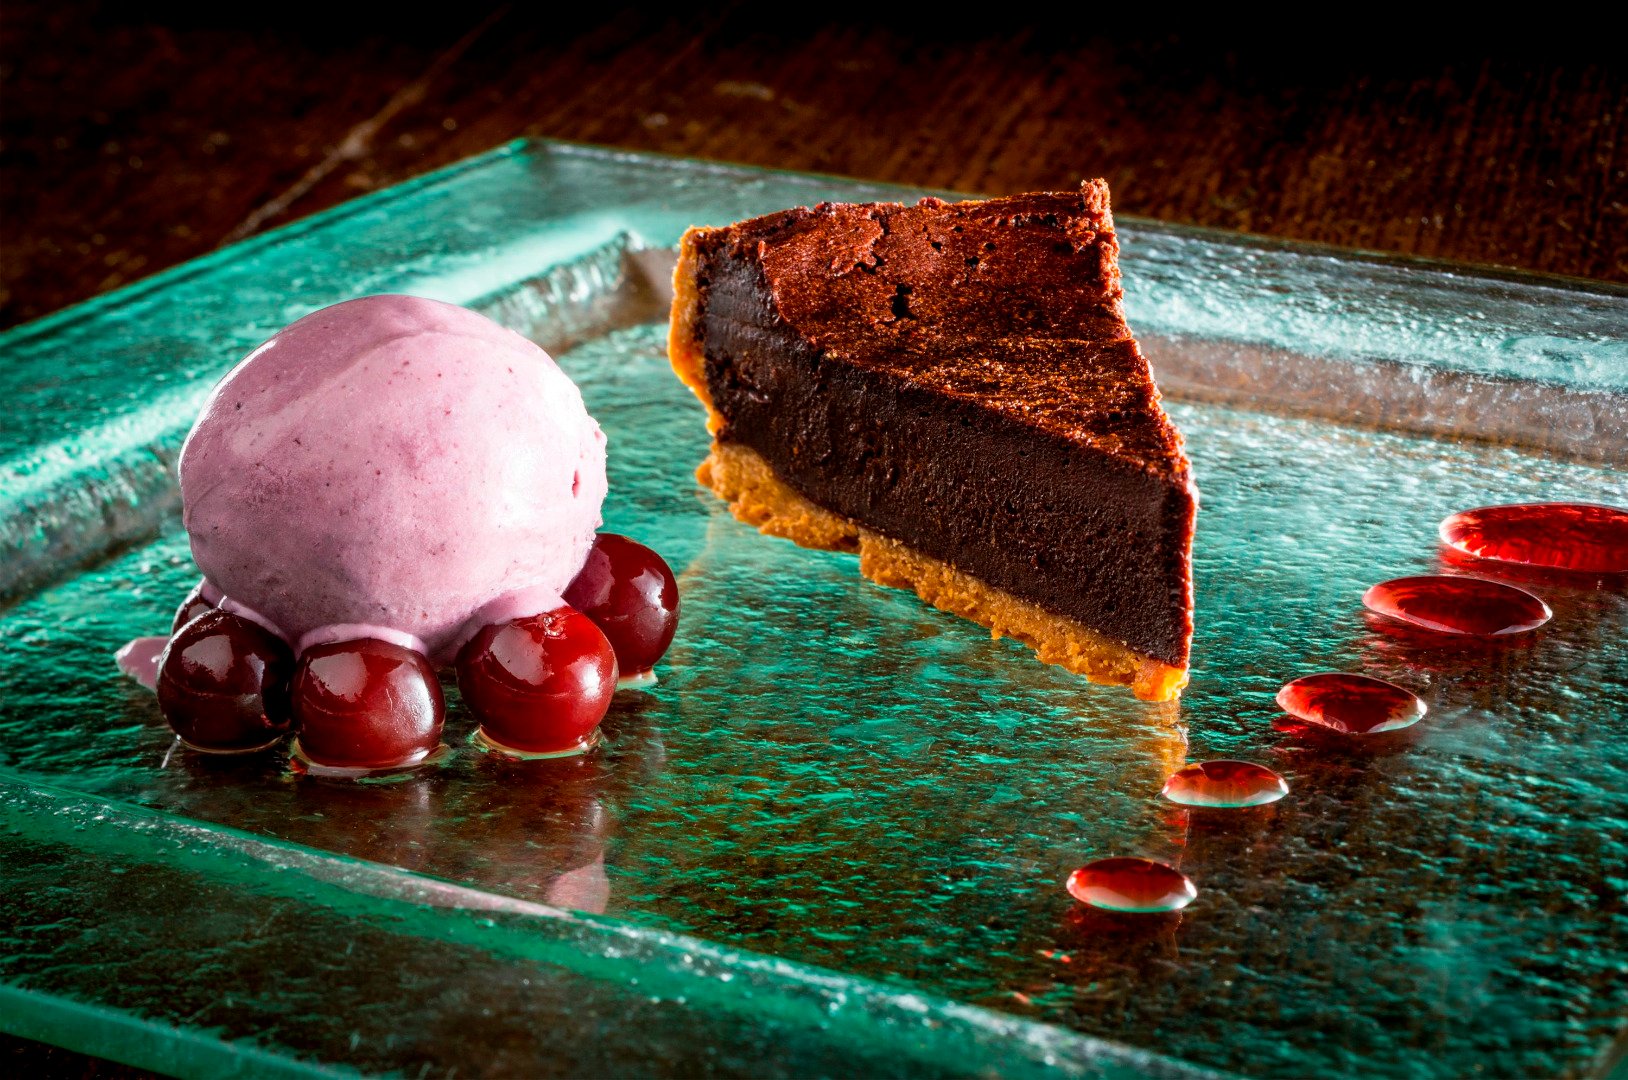 Image name homemade chocolate tart with cherry ice cream cherries the blue lion inn east witton the good pub guide inn of the year 20141 the 20 image from the post Eating out in the Yorkshire Dales in Yorkshire.com.